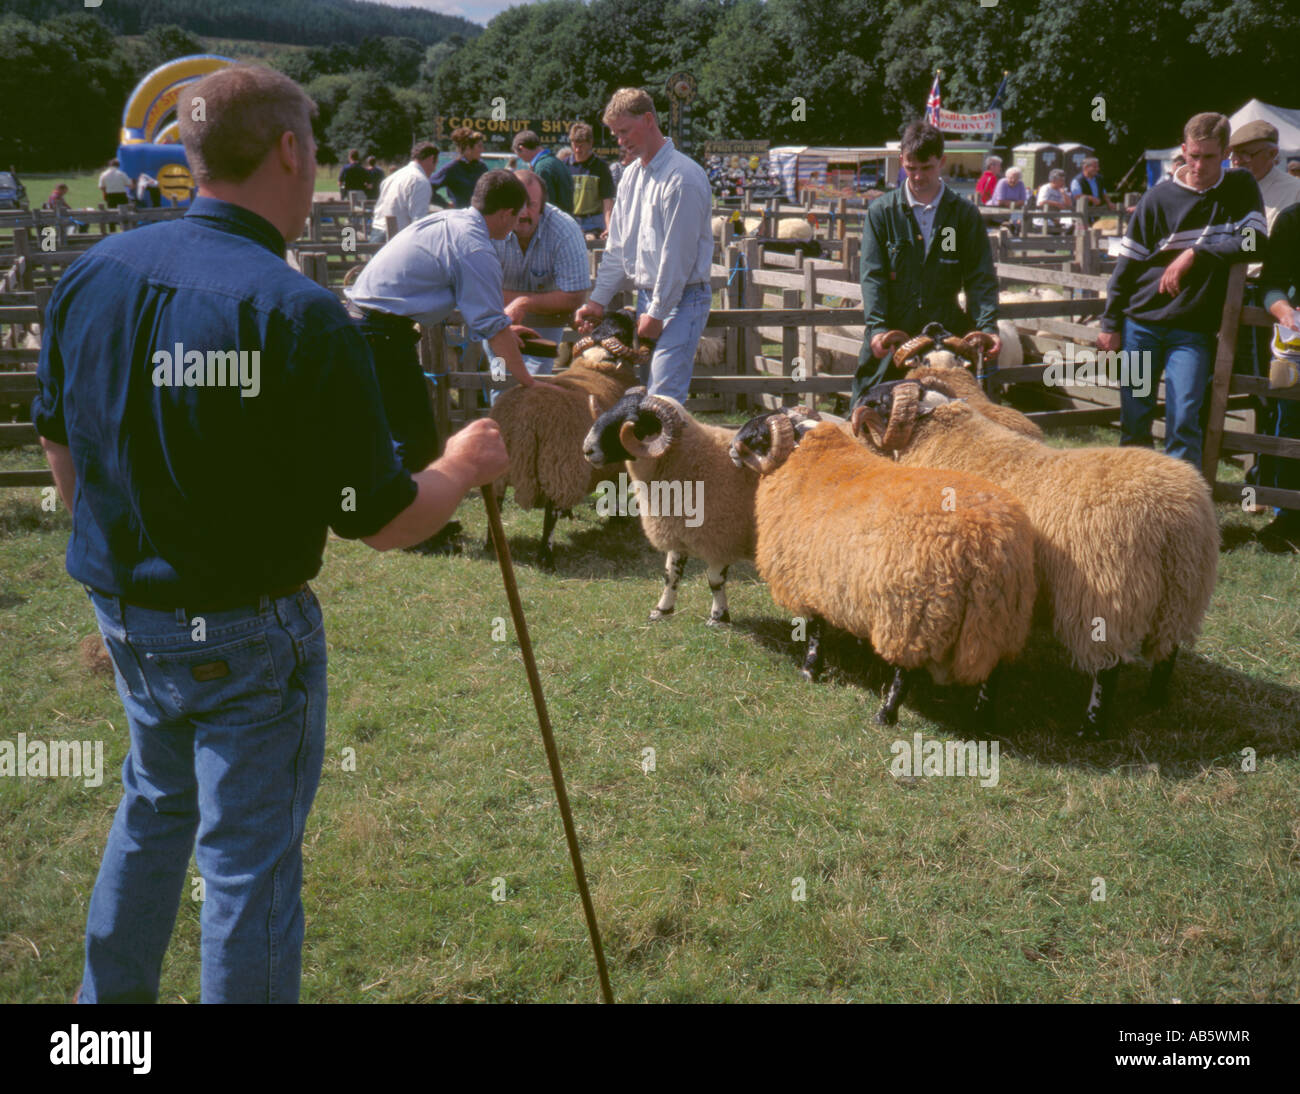 Tups being judged at Falstone Agricultural Show, Falstone village, Northumberland, England, UK. Stock Photo